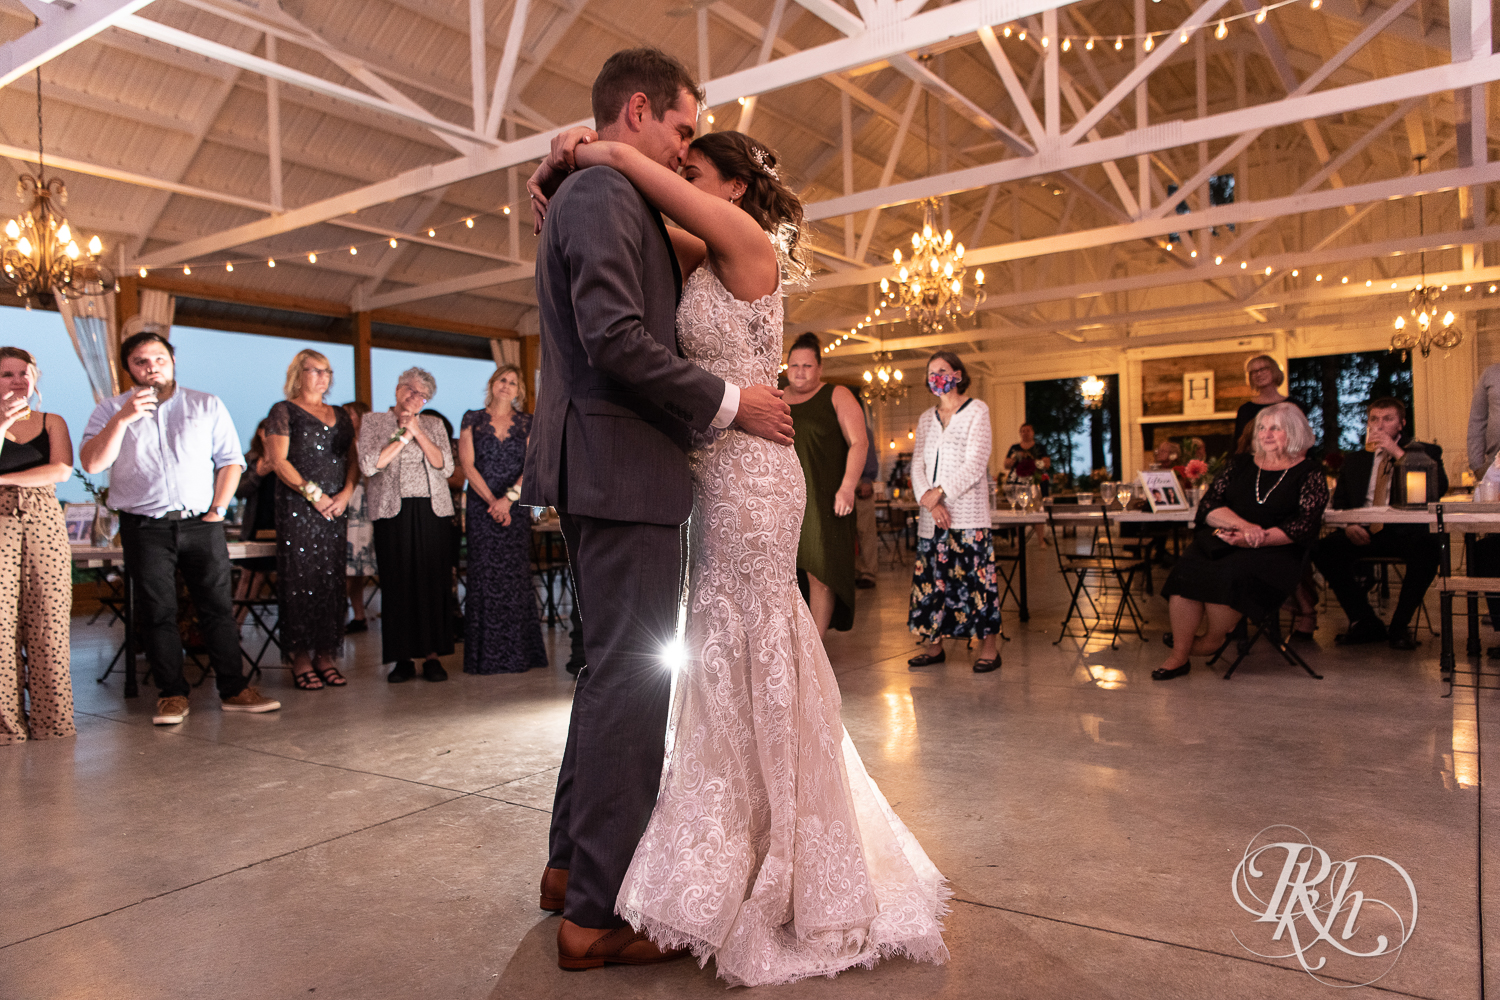 Bride and groom share first dance at wedding reception at Legacy Hills Farm in Welch, Minnesota.